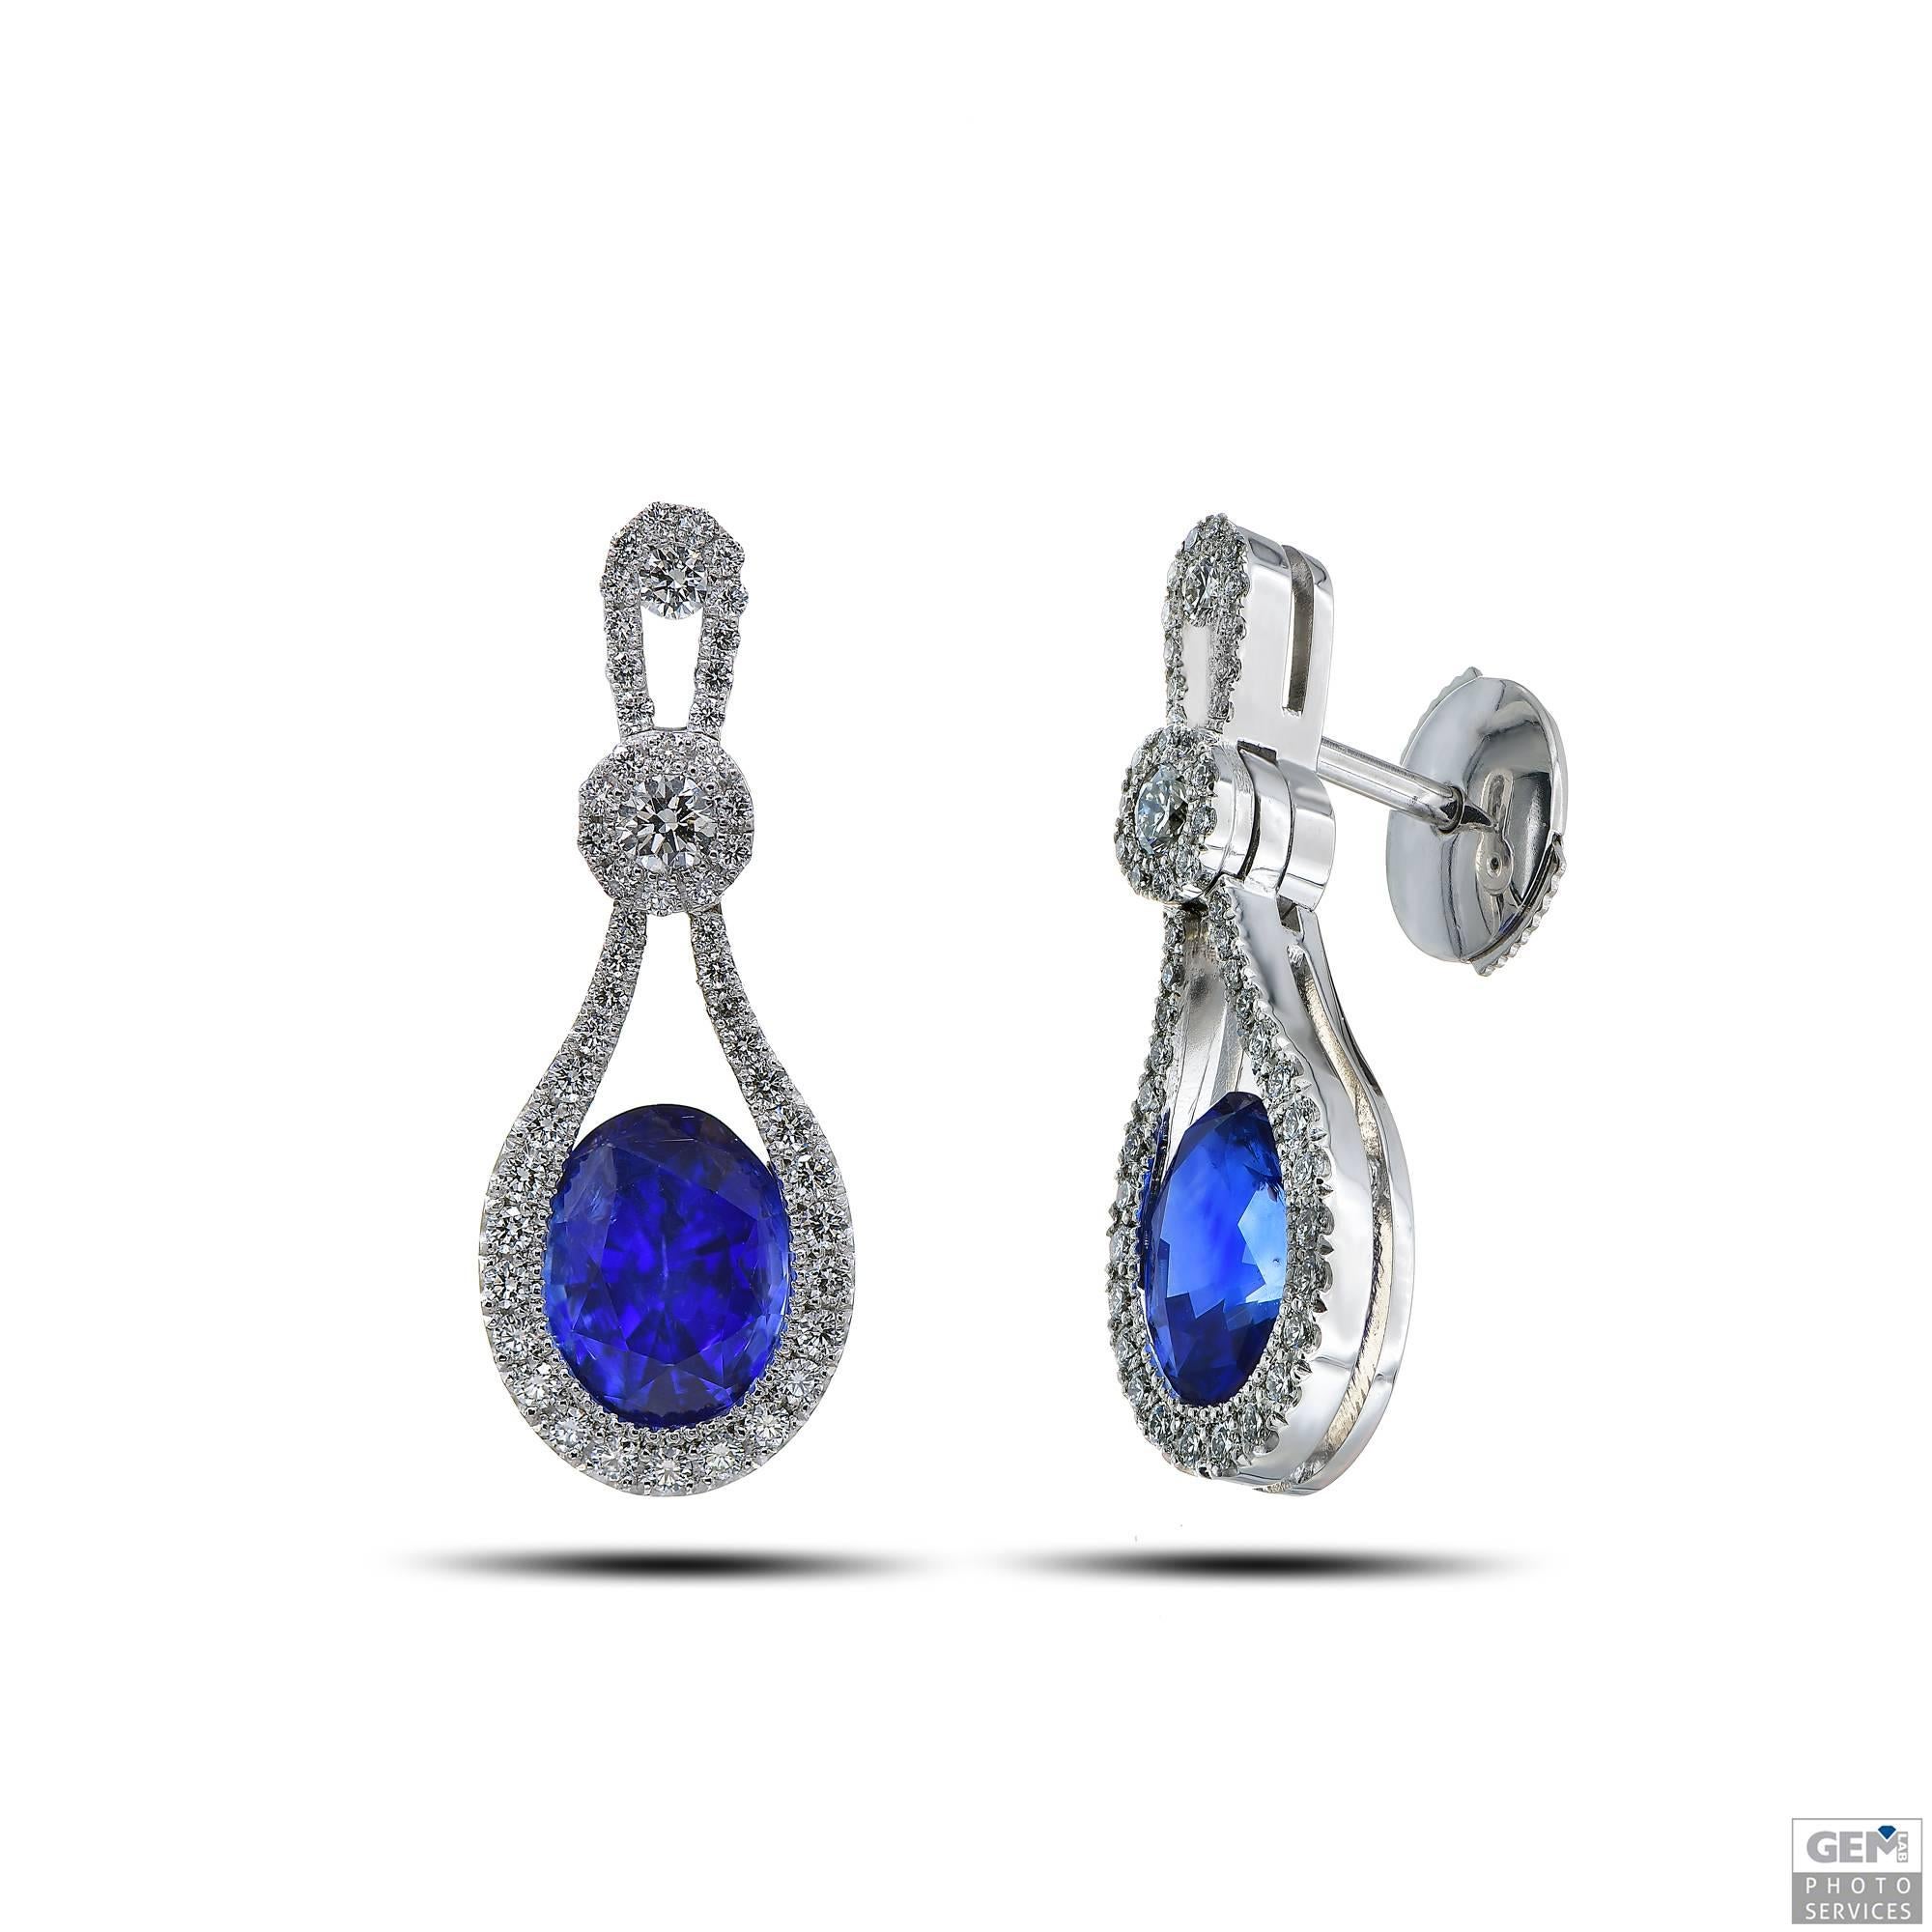 Lovely sapphire dangle earrings, making it a playful but very classy and elegant earring to wear on several occasions!

The earrings are designed by Carigi around a couple of blue oval sapphires, with a total weight of 3,63ct. It is a perfect couple